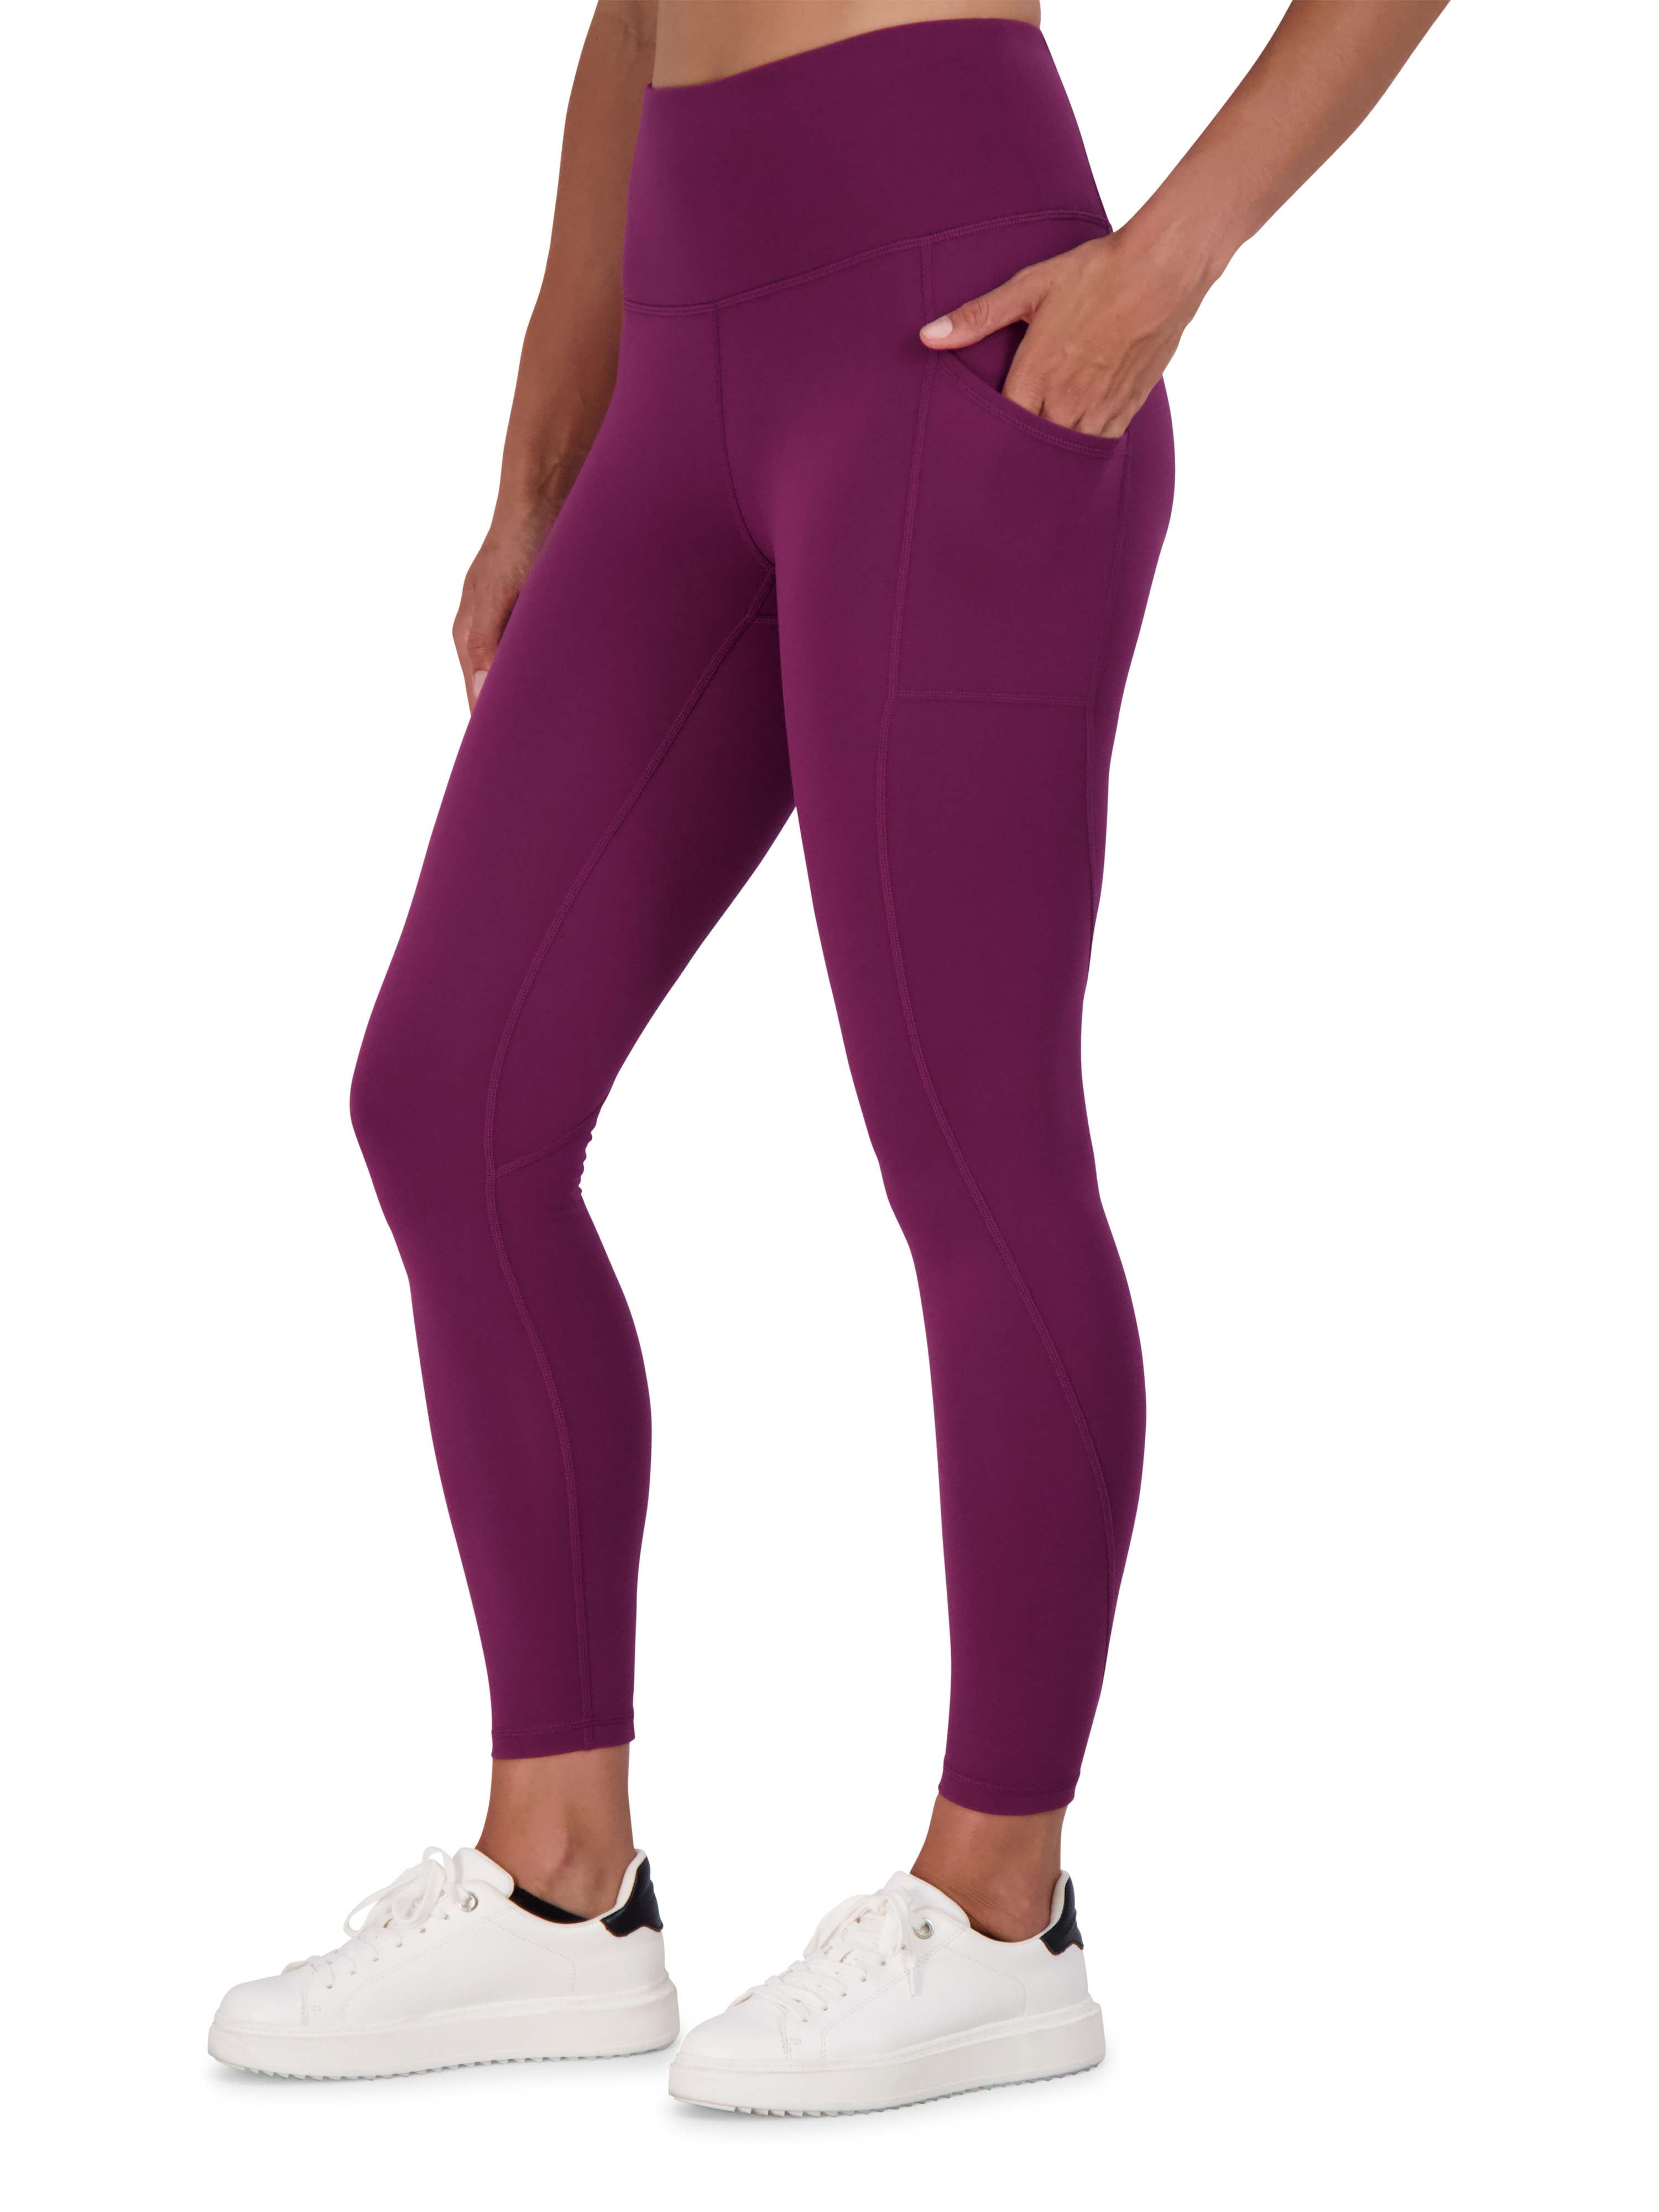 UUE 25Inseam Purple Soft leggings with 3 Pockets for women and girls, High  waist soft leggings for Yoga and Running